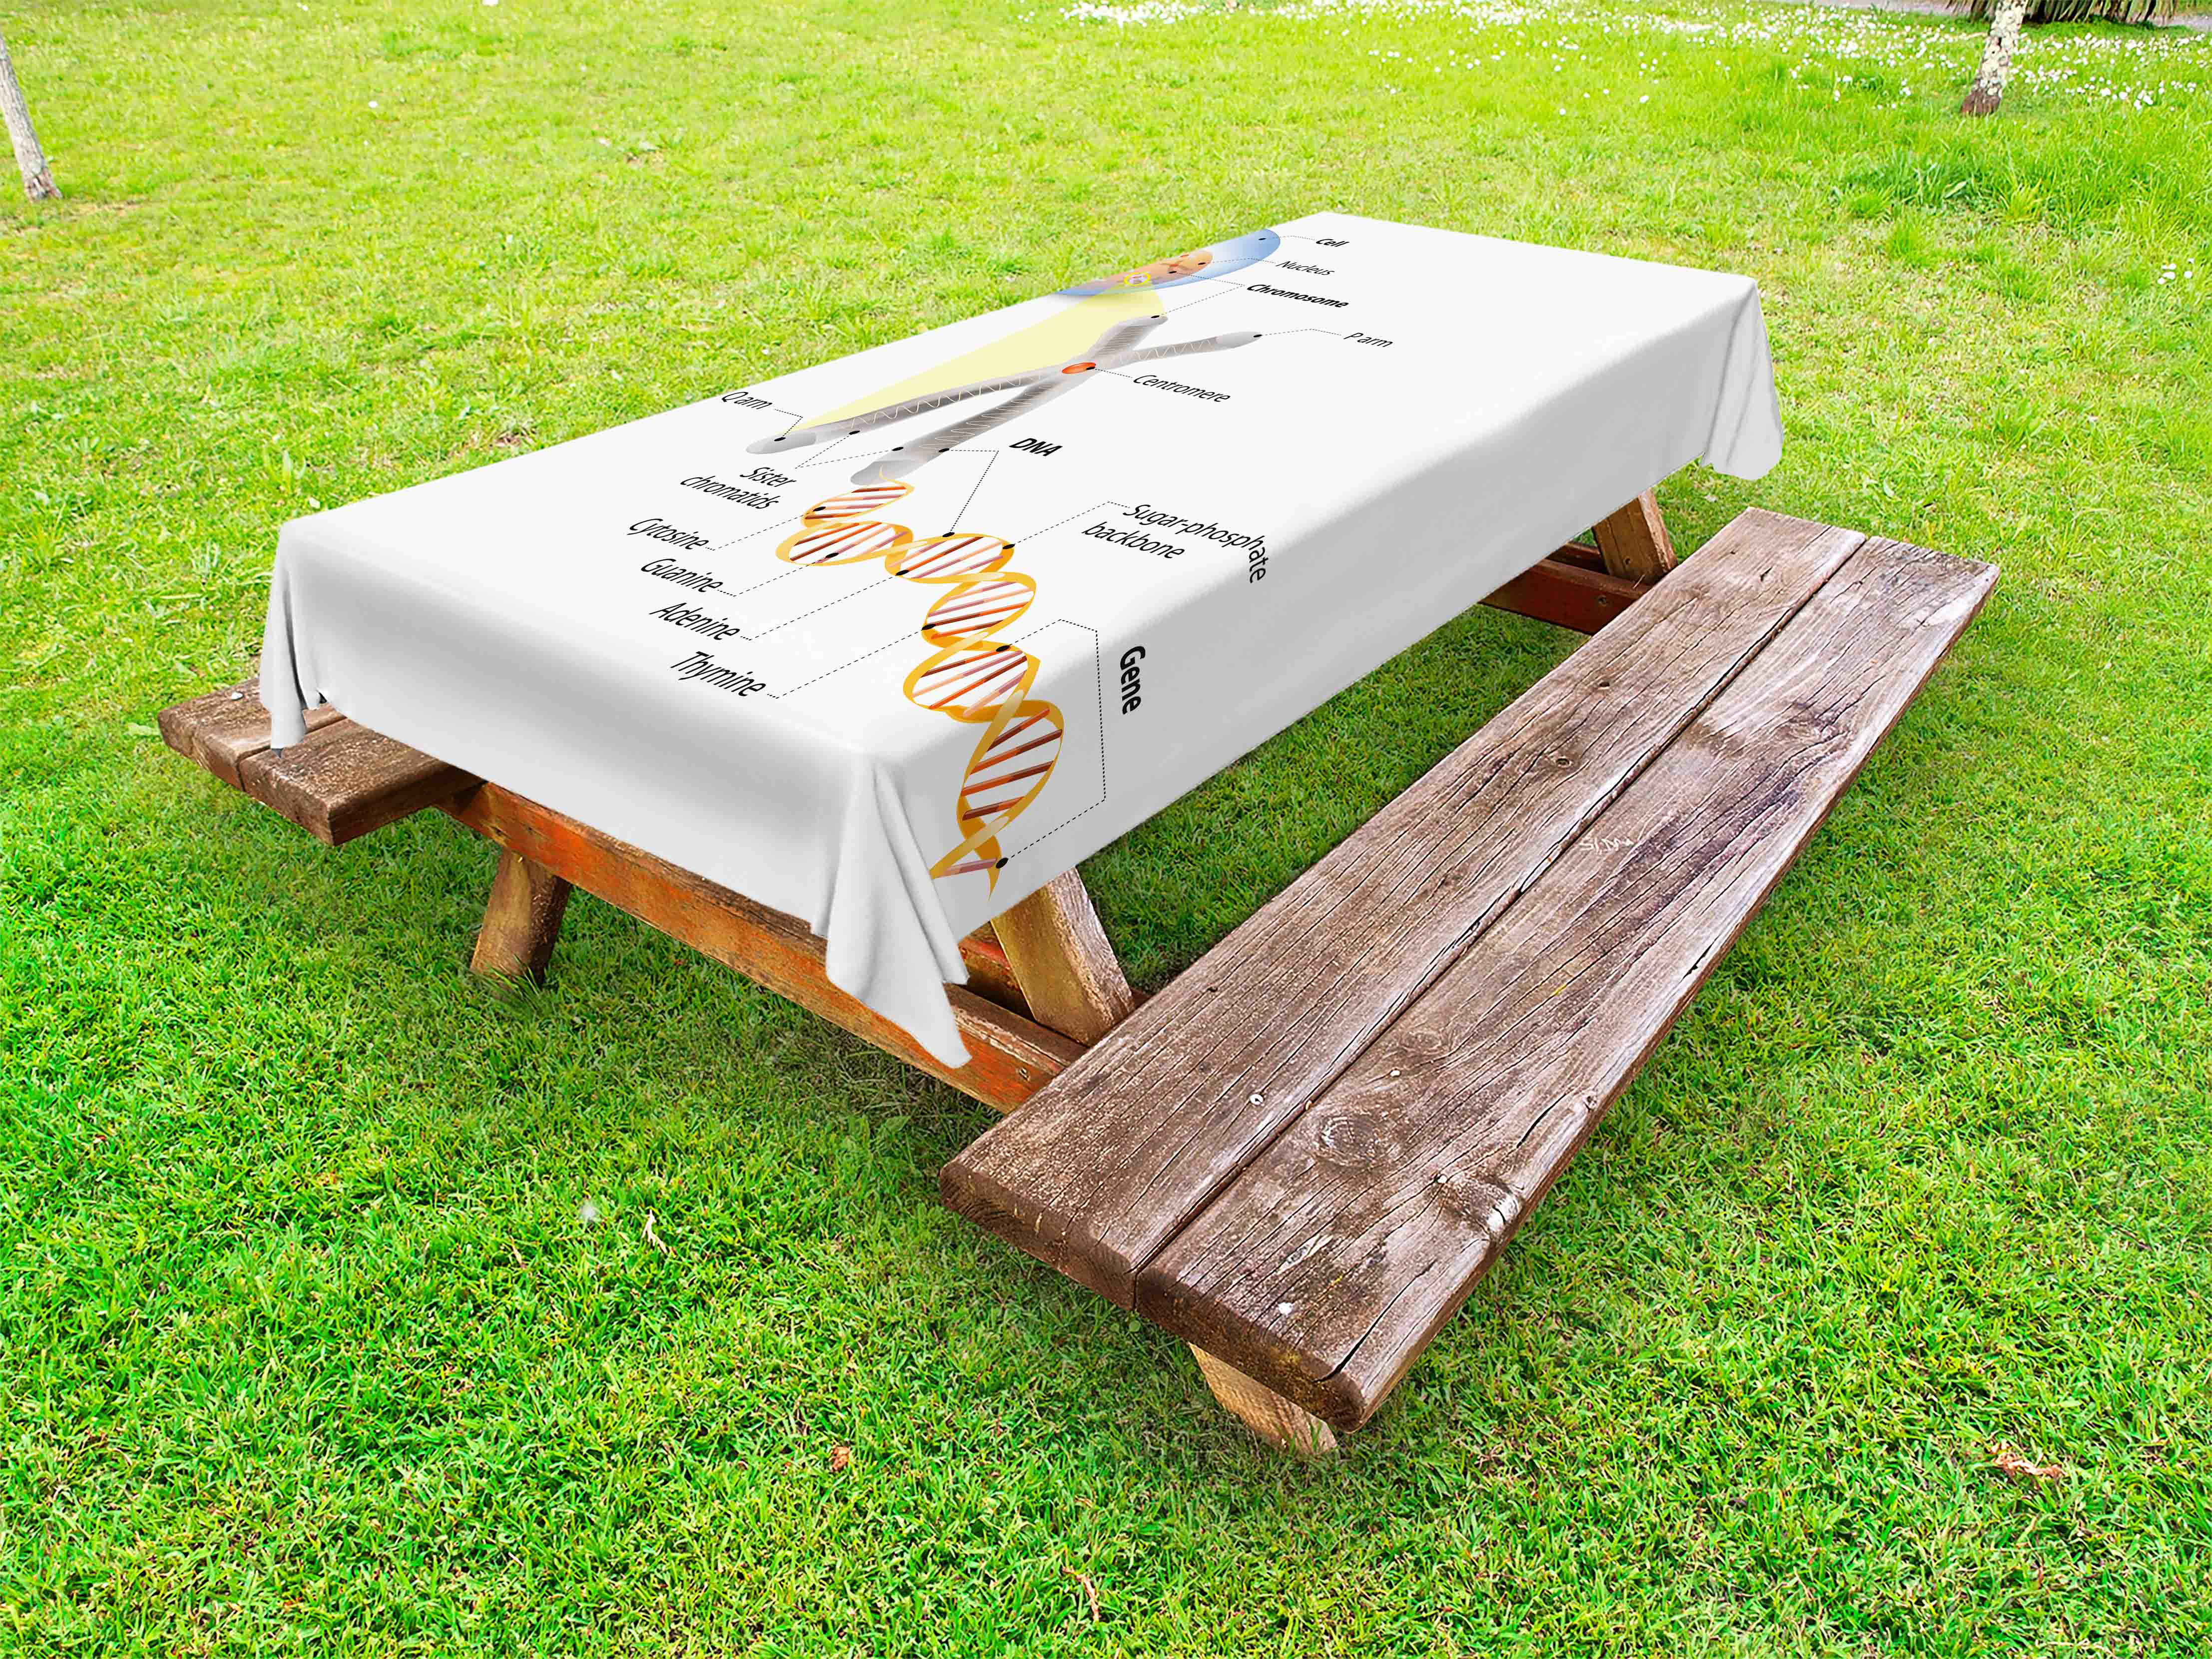 Educational Summer Table Cloths Cell Chromosome DNA Gene Genome Study Double Helix Evolution Science Research Multicolor All Weather Outdoor Table Cloth Spring/Summer/Party/Picnic 52 by 70